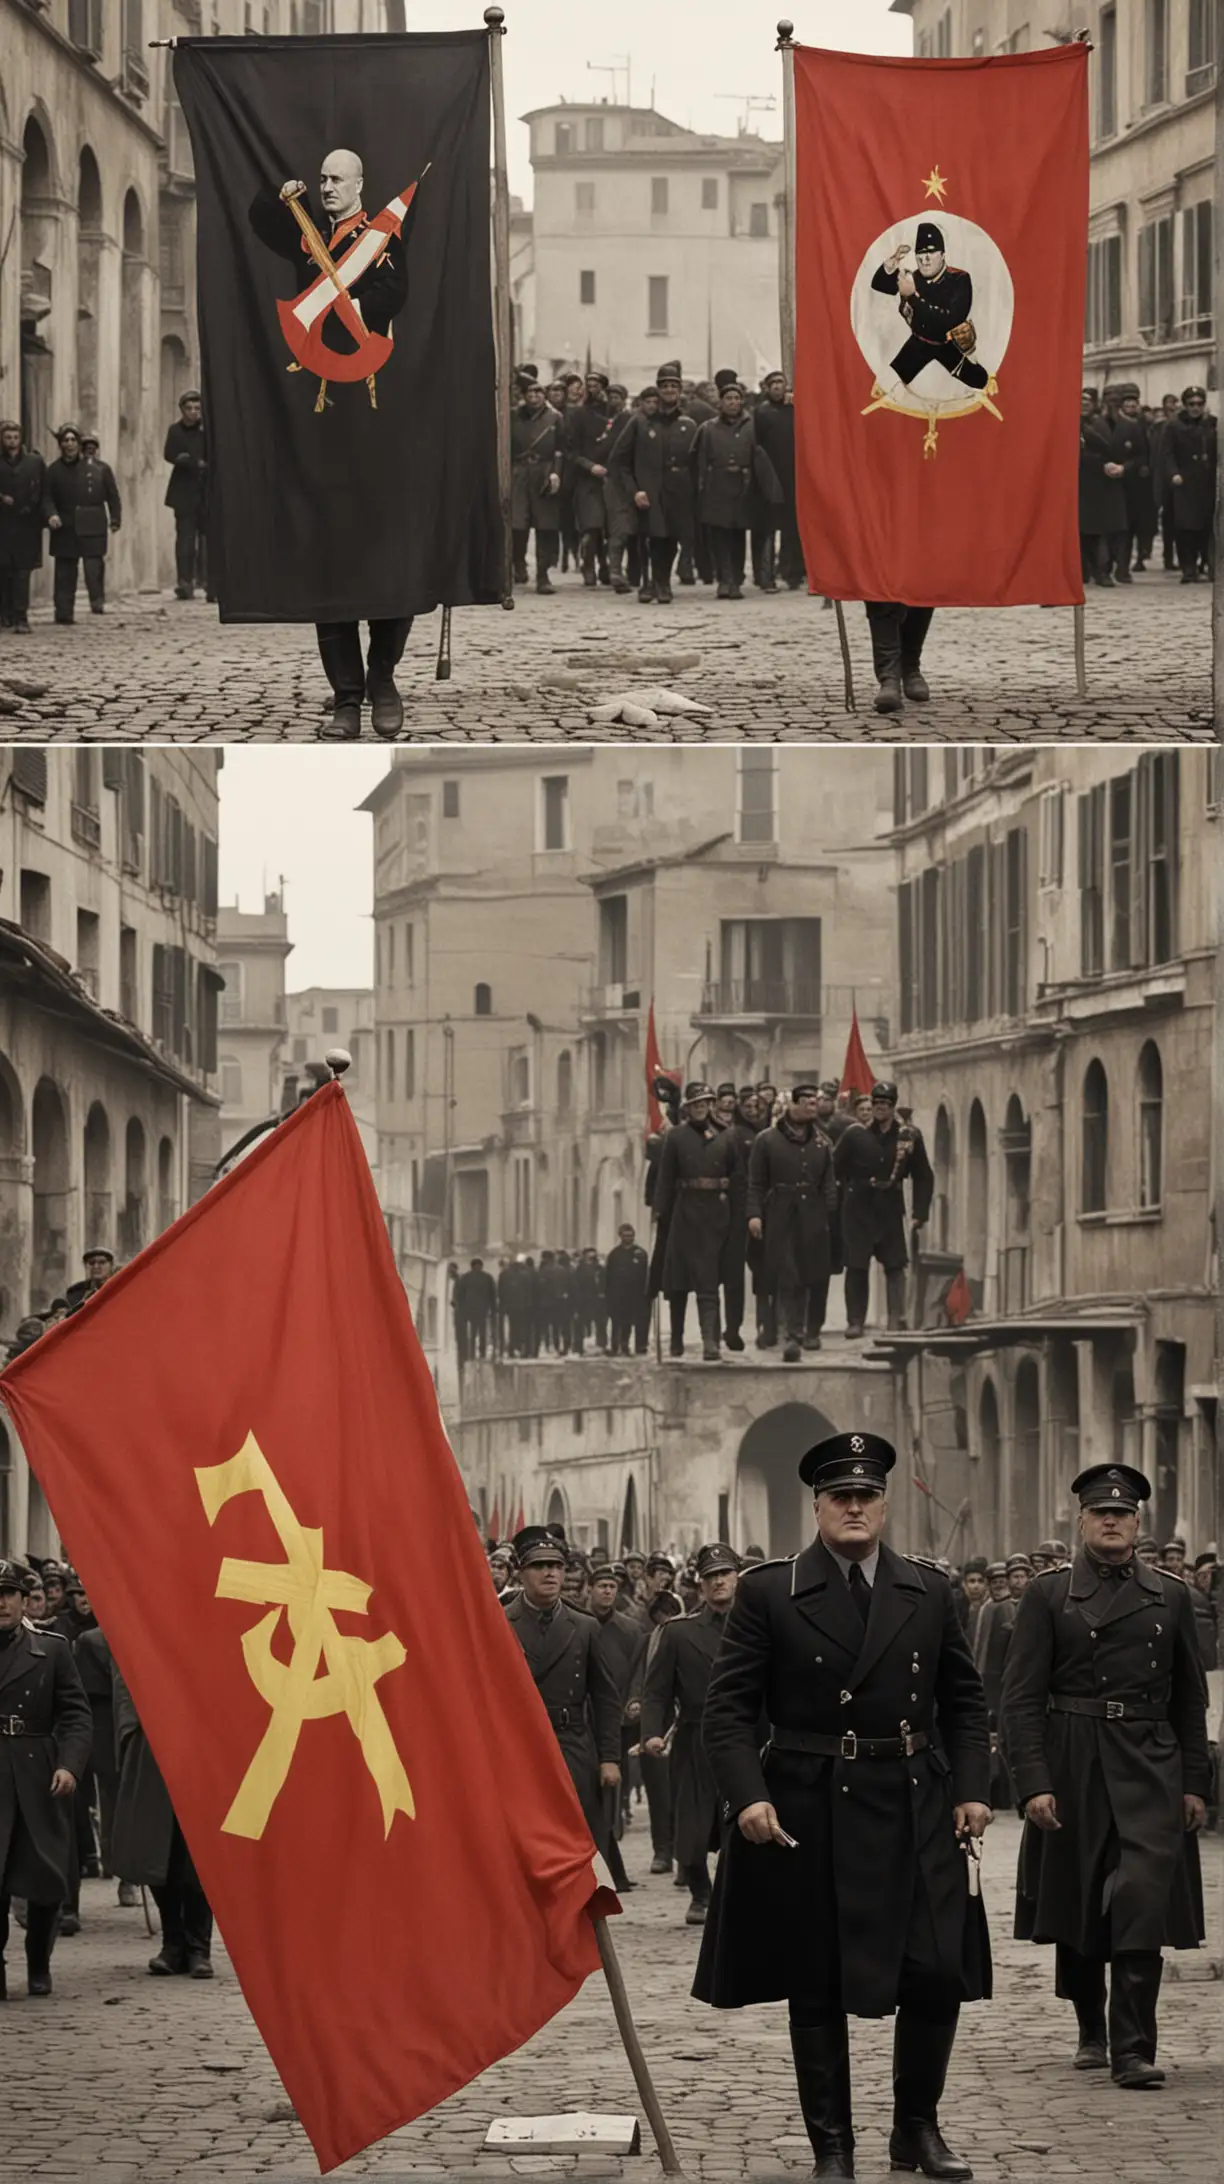 Mussolini Holding Socialist and Fascist Flags in Rome